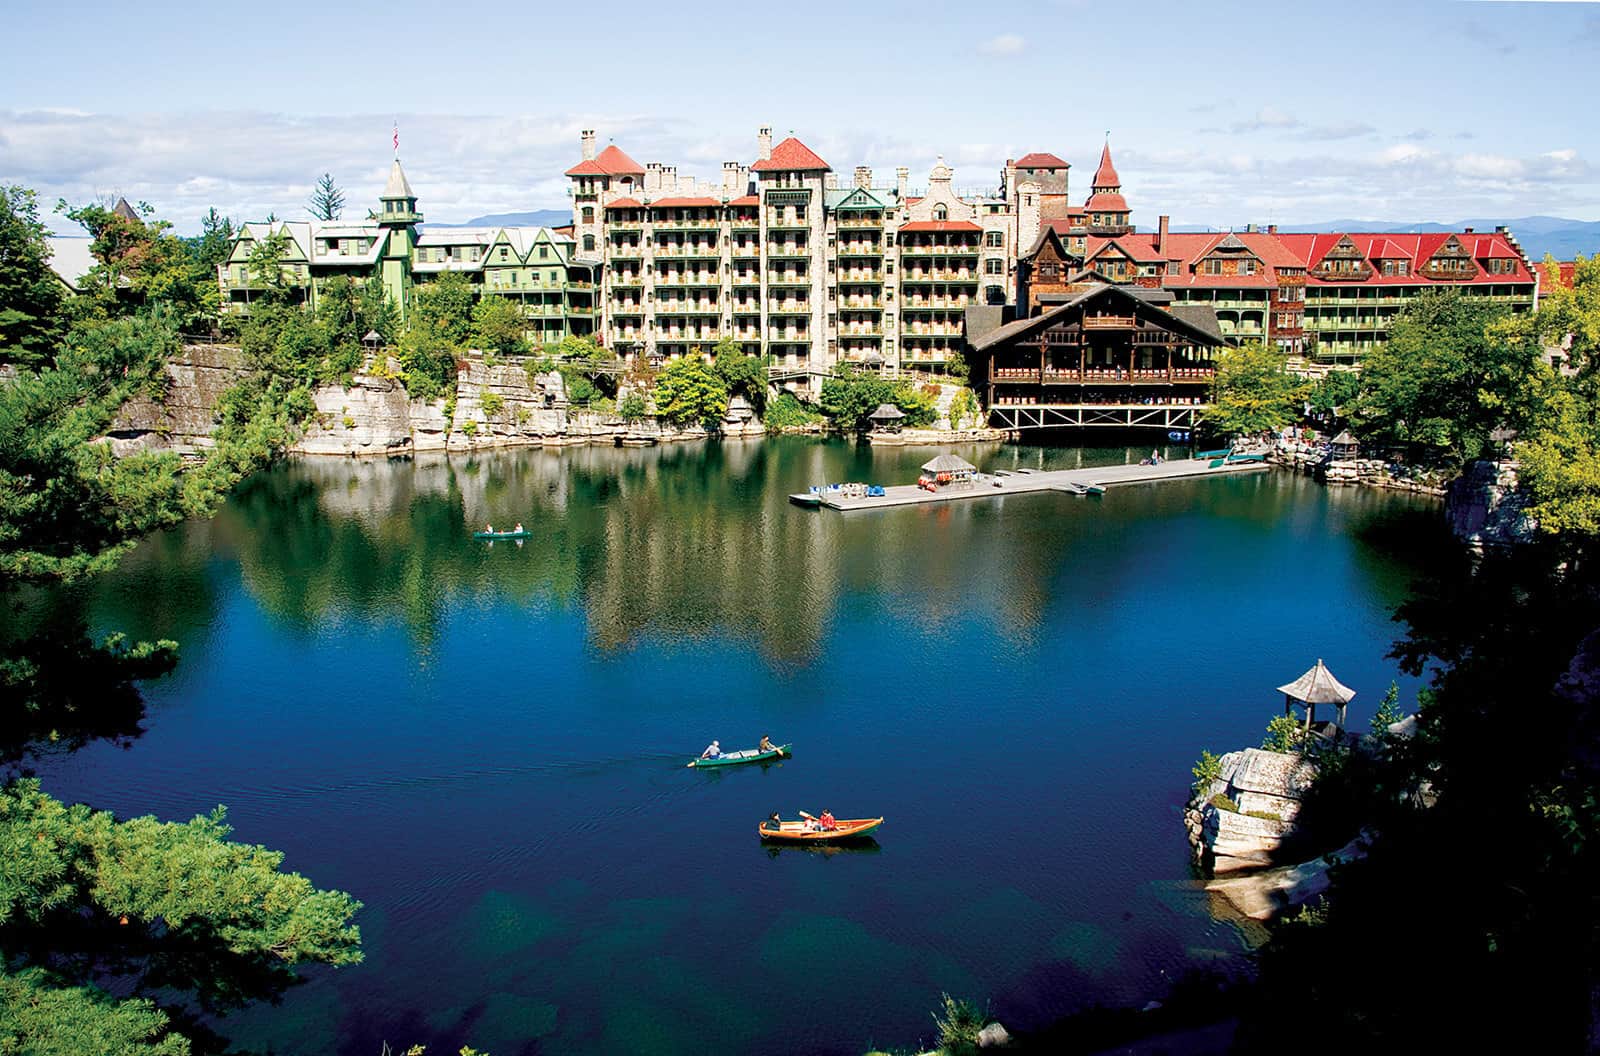 Watersports - Mohonk Mountain House